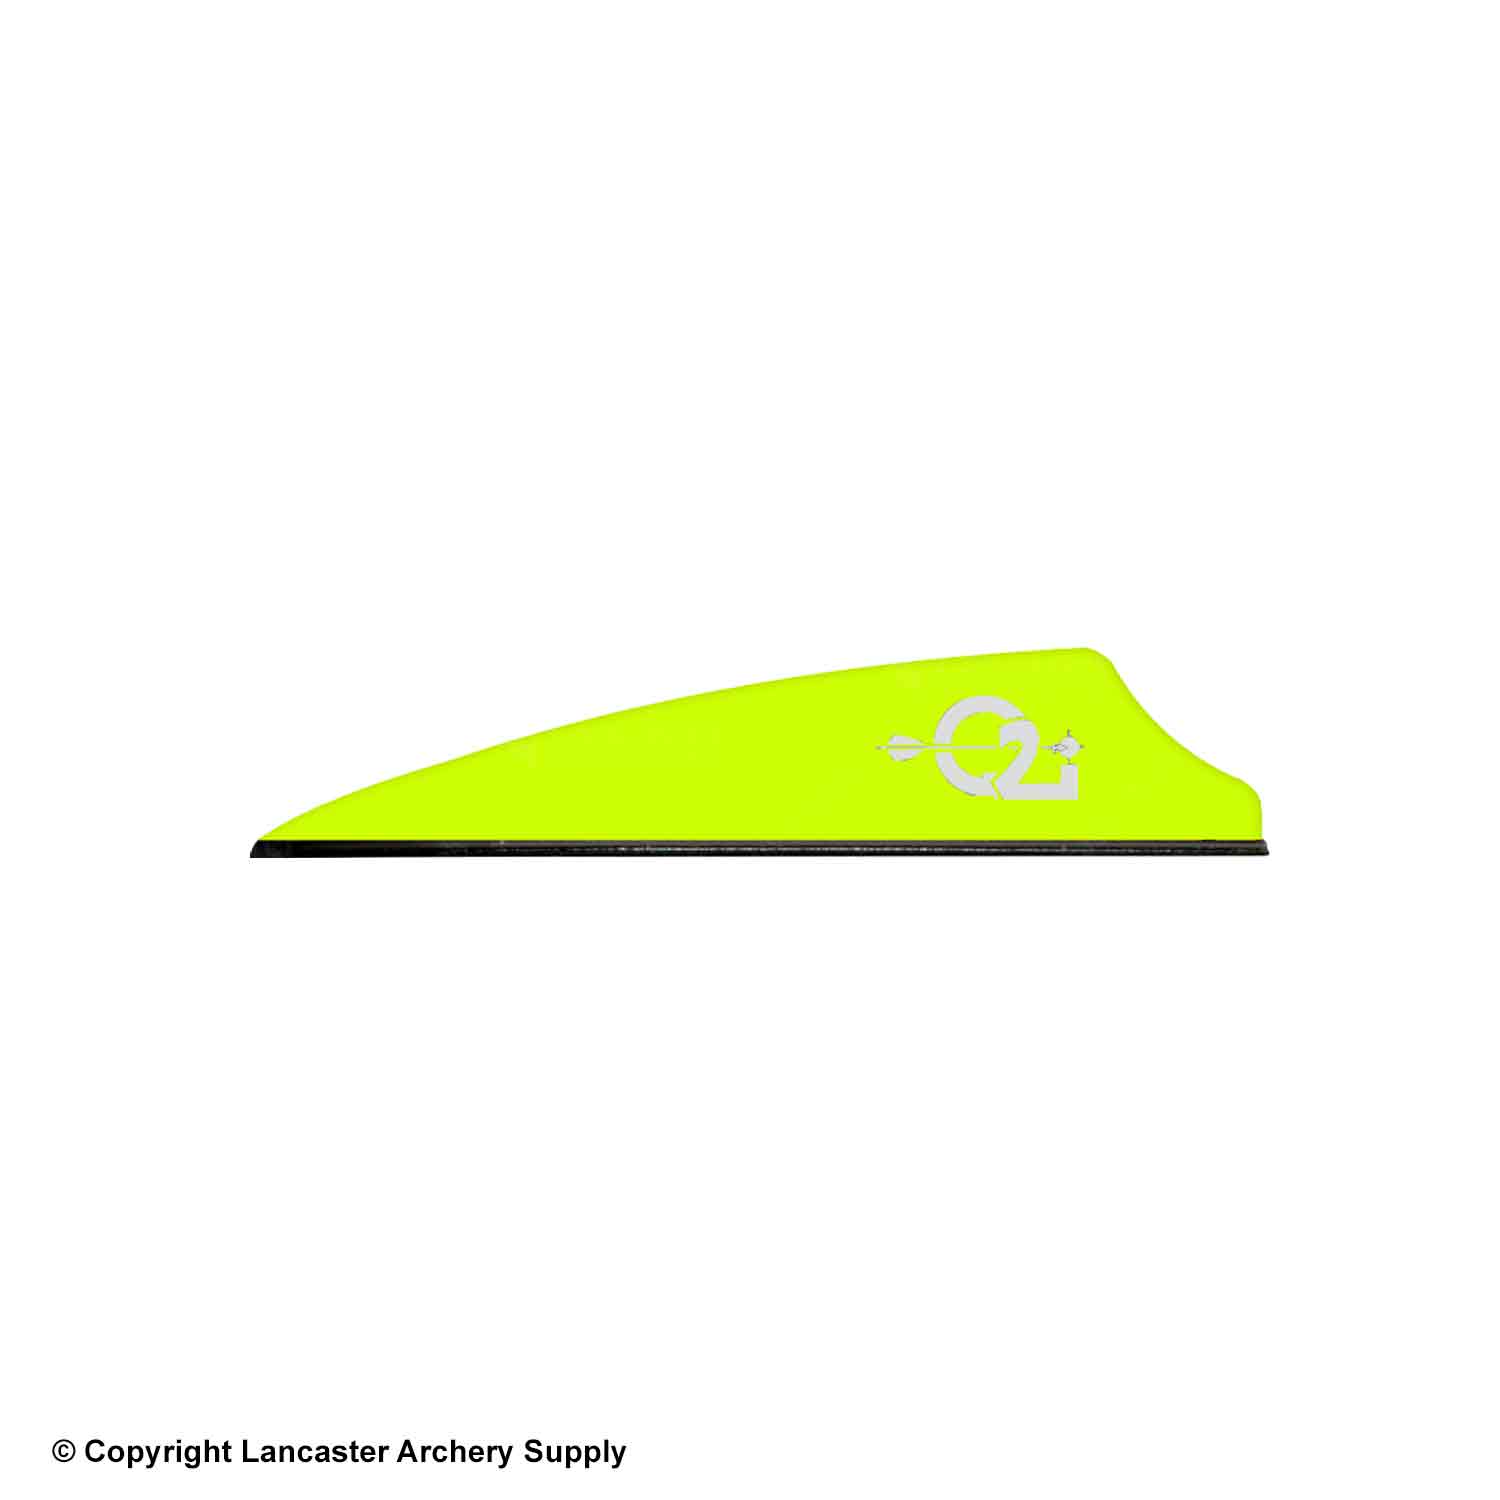 Shield cut vane that is neon yellow, has a black base, and silver Q2i logo.